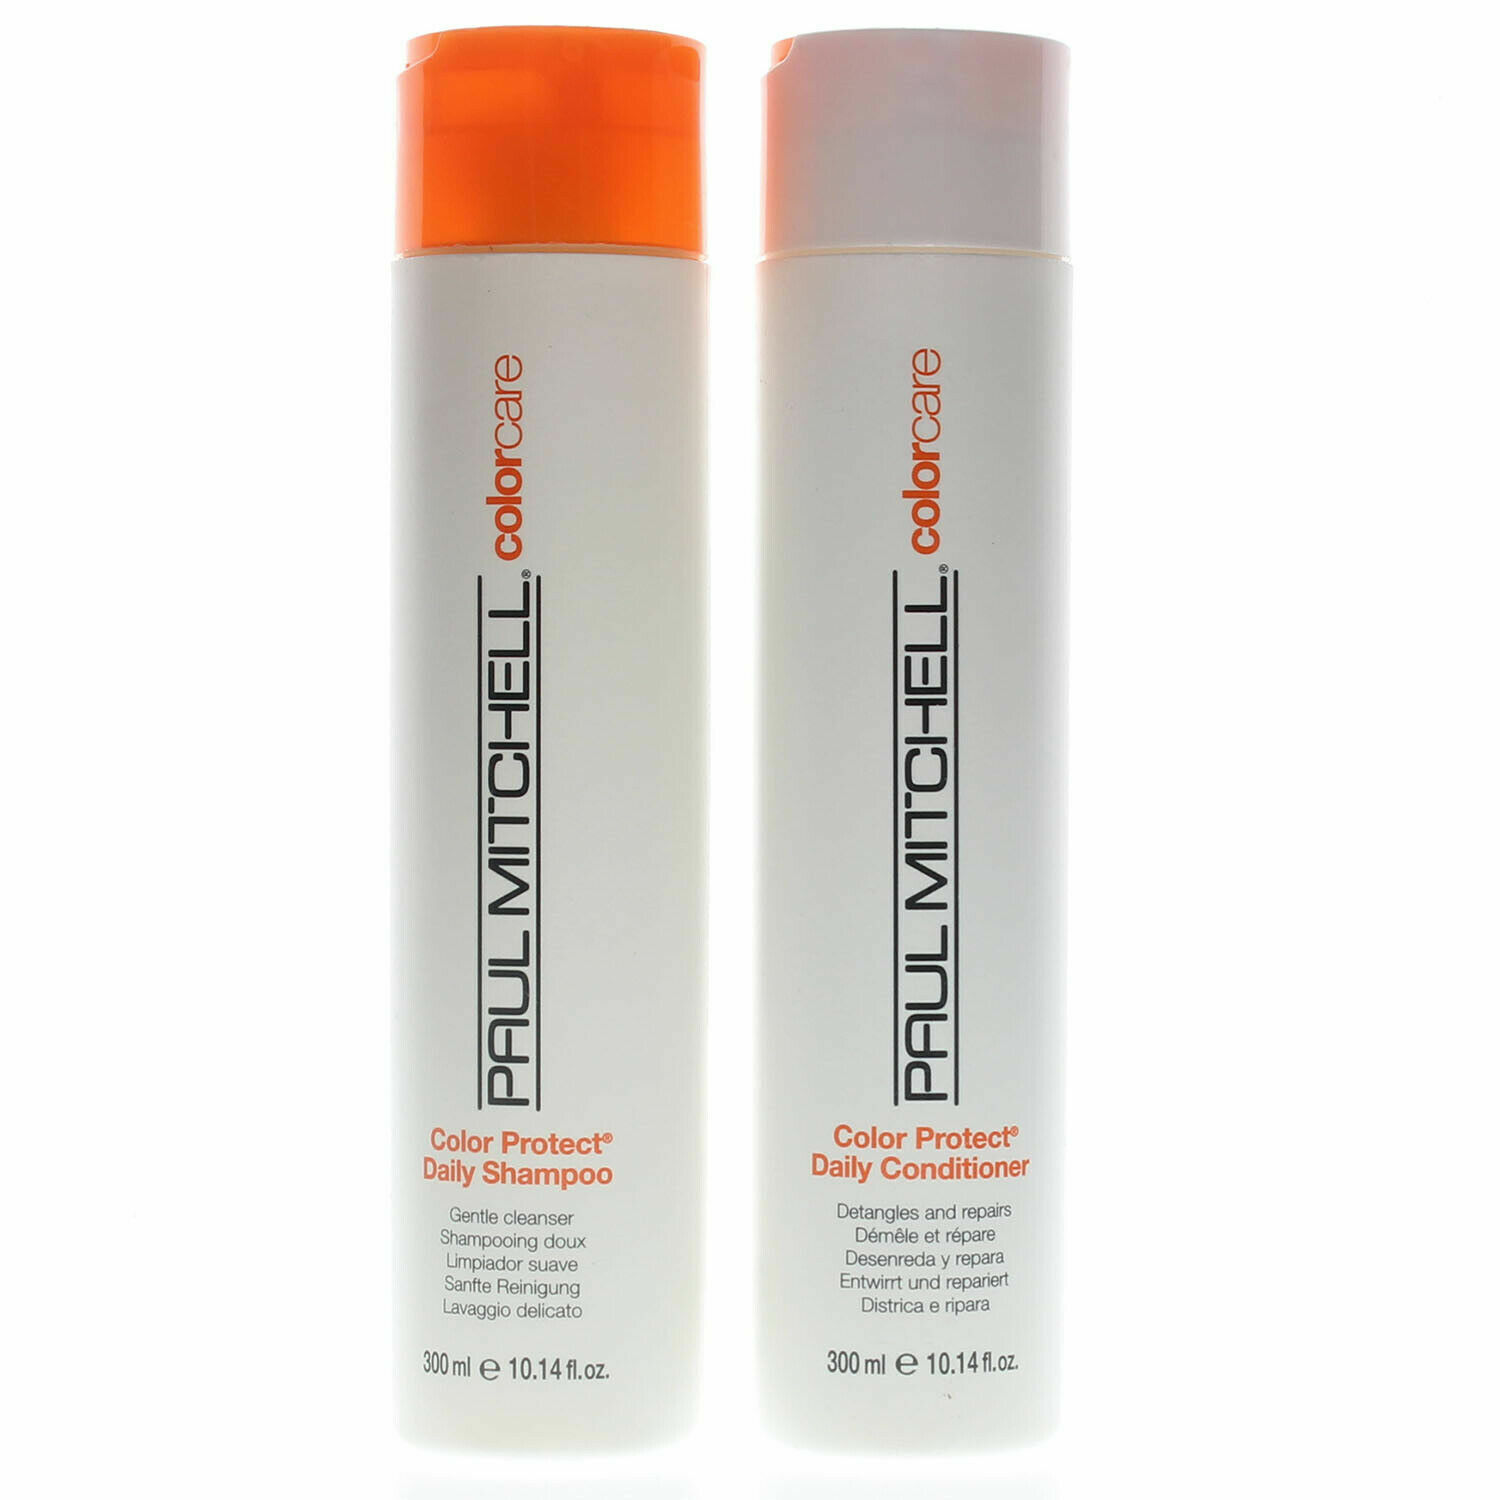 Paul Mitchell Color Protect Shampoo and Conditioner 10.14oz - $29.97